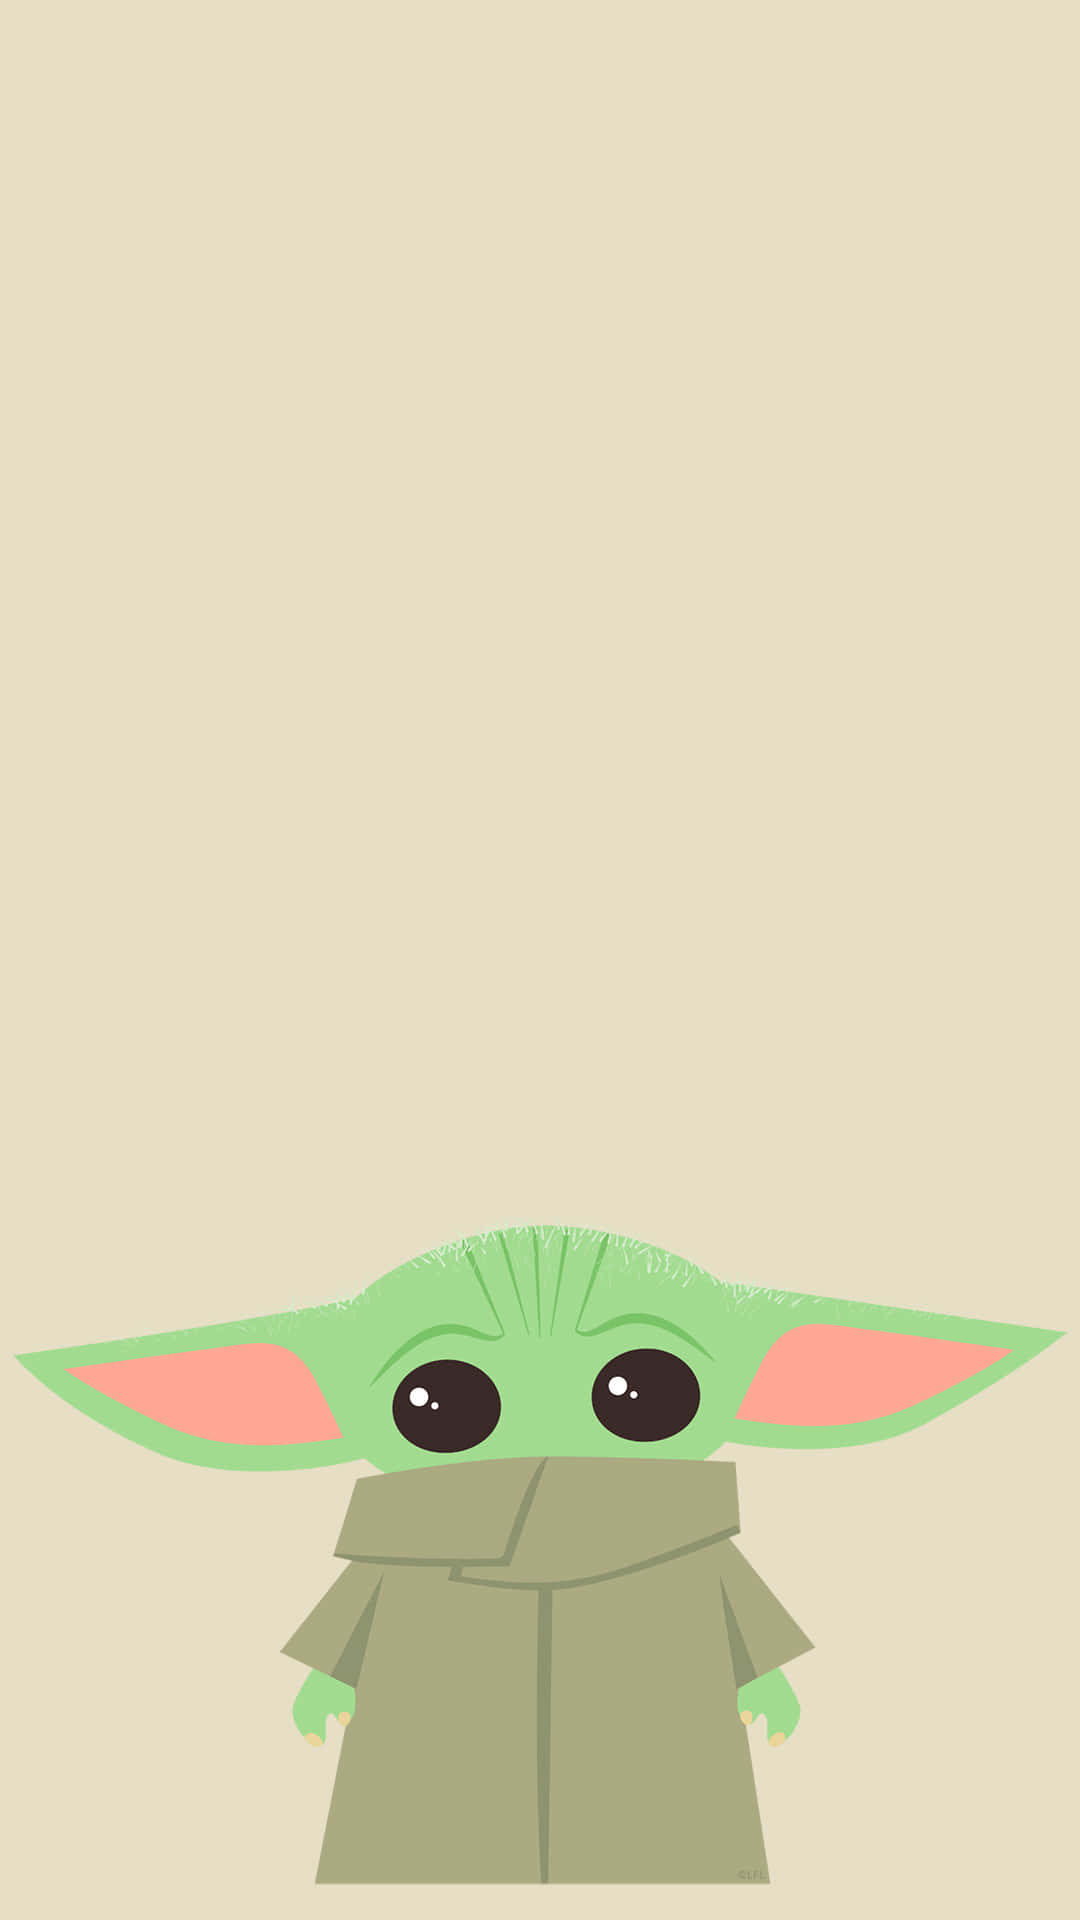 Keep your Star Wars fandom alive with Baby Yoda Phone! Wallpaper